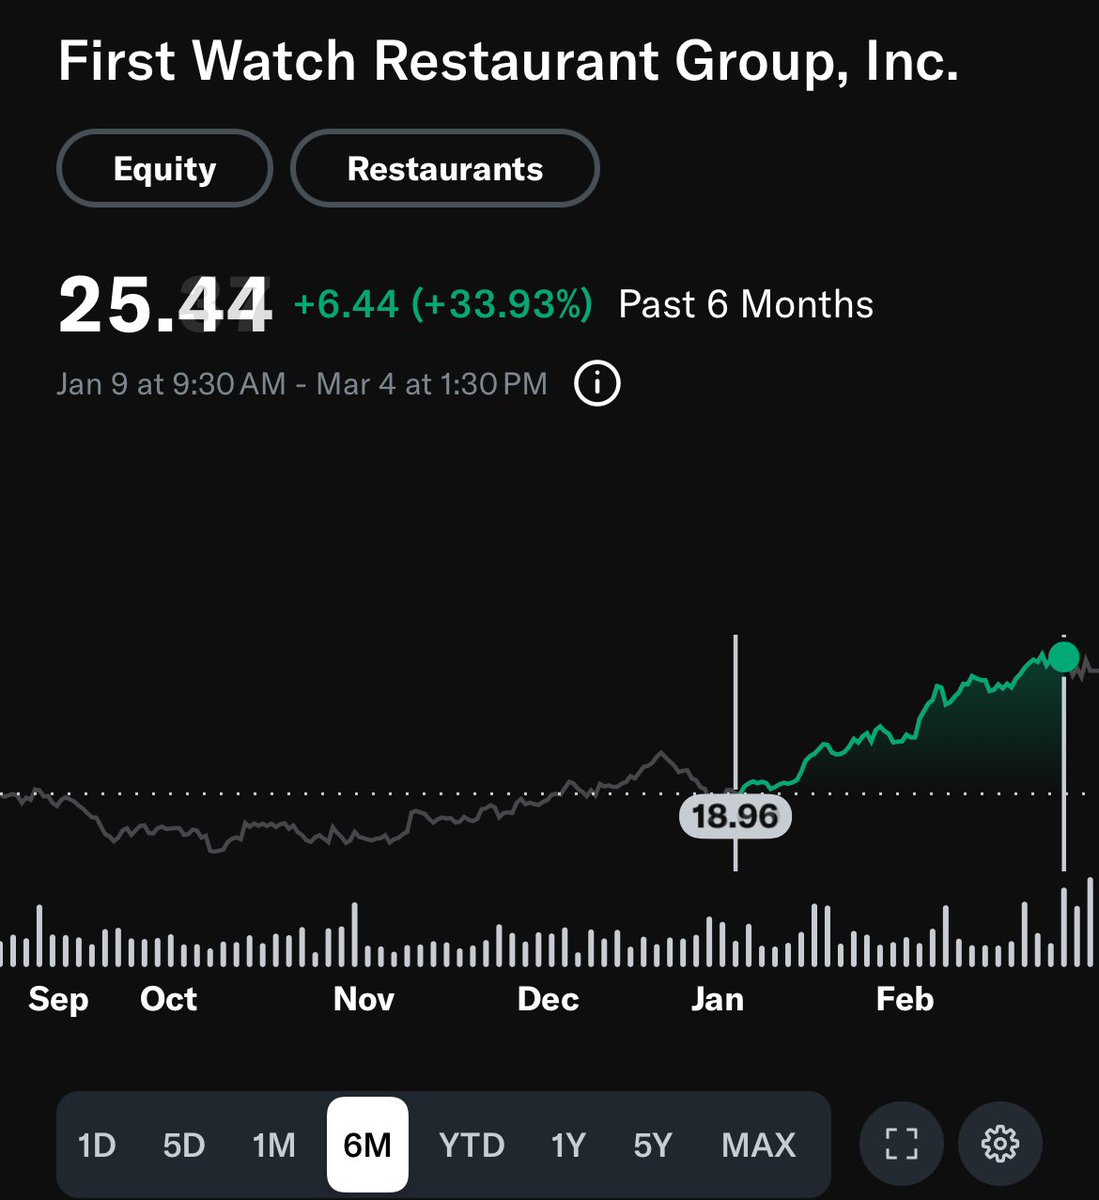 $FWRG →called it, after IPO Sponsor @adventintl PUMPED @First_Watch +30% & posted mediocre earnings, insiders

FILED 6MM SECONDARY ($150MM)
100% proceeds→@adventintl

Guess selling 1 Pancake $10 commensurates the 80X multiple

UNDER $20 BY THE SUMMER

investors.firstwatch.com/node/8581/pdf